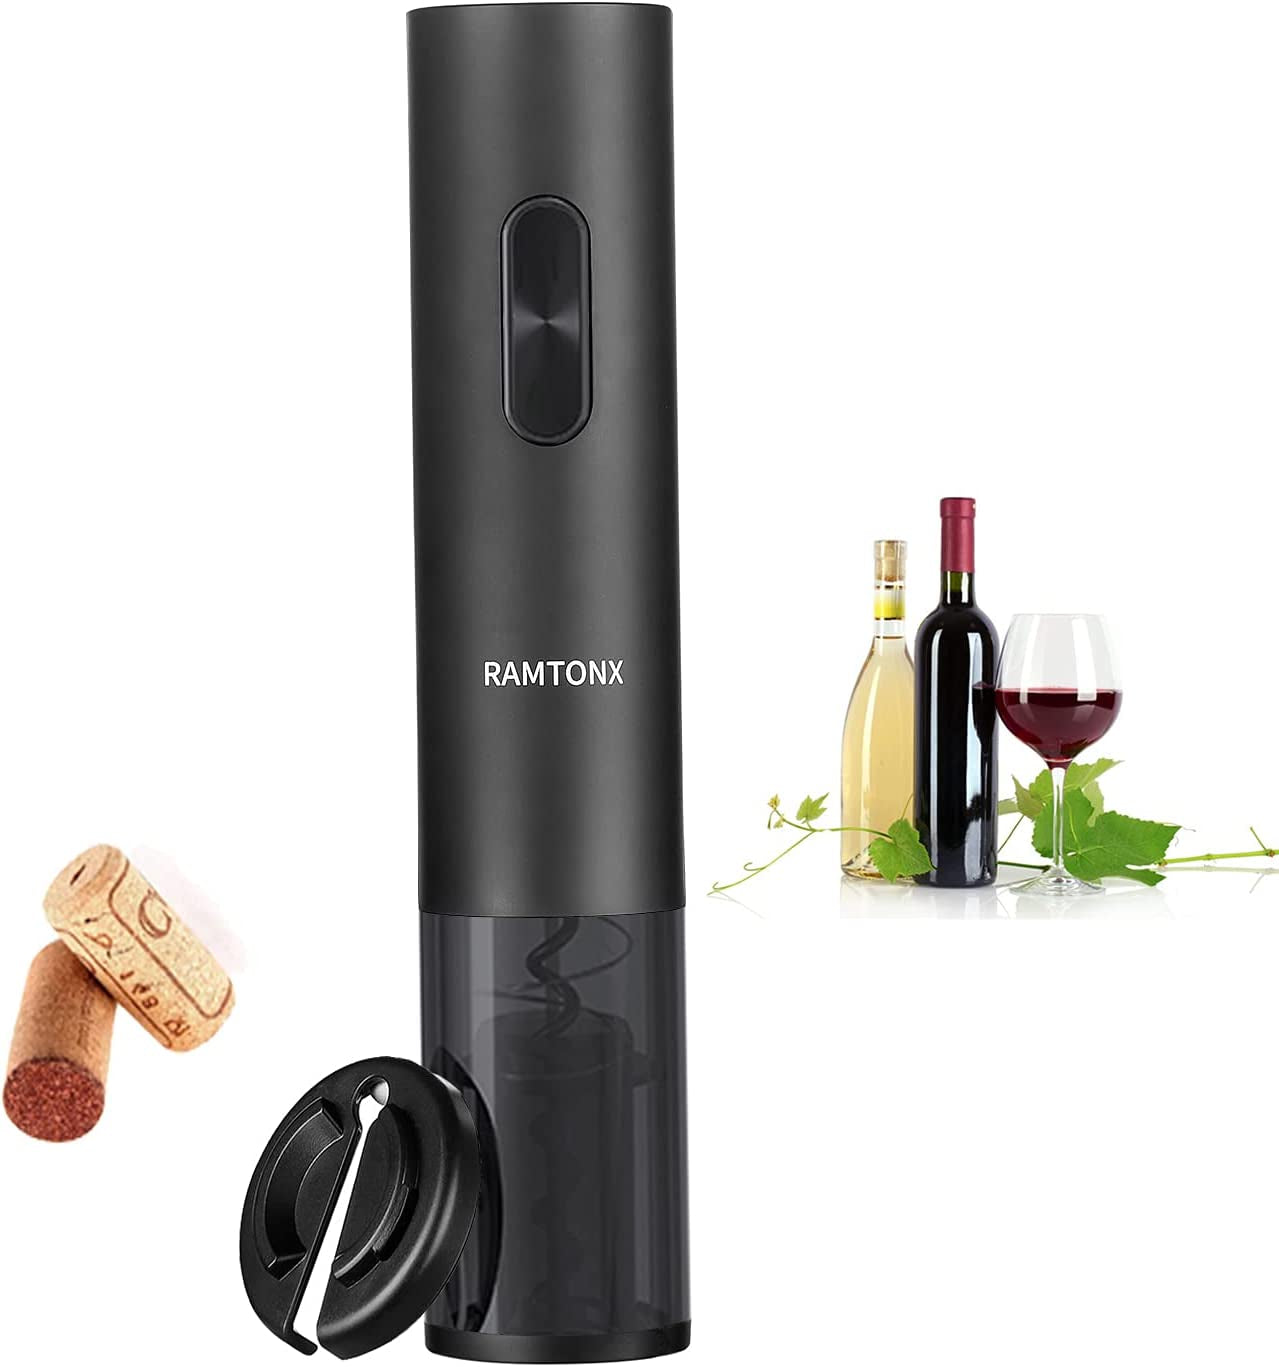 Electric Wine Bottle Opener, Battery Operated Wine Opener Corkscrew Set with Foil Cutter, Automatic Reusable Easy Carry Wine Opener Gift for Waiter Women as Bar Outdoor Kitchen Wine Accessories